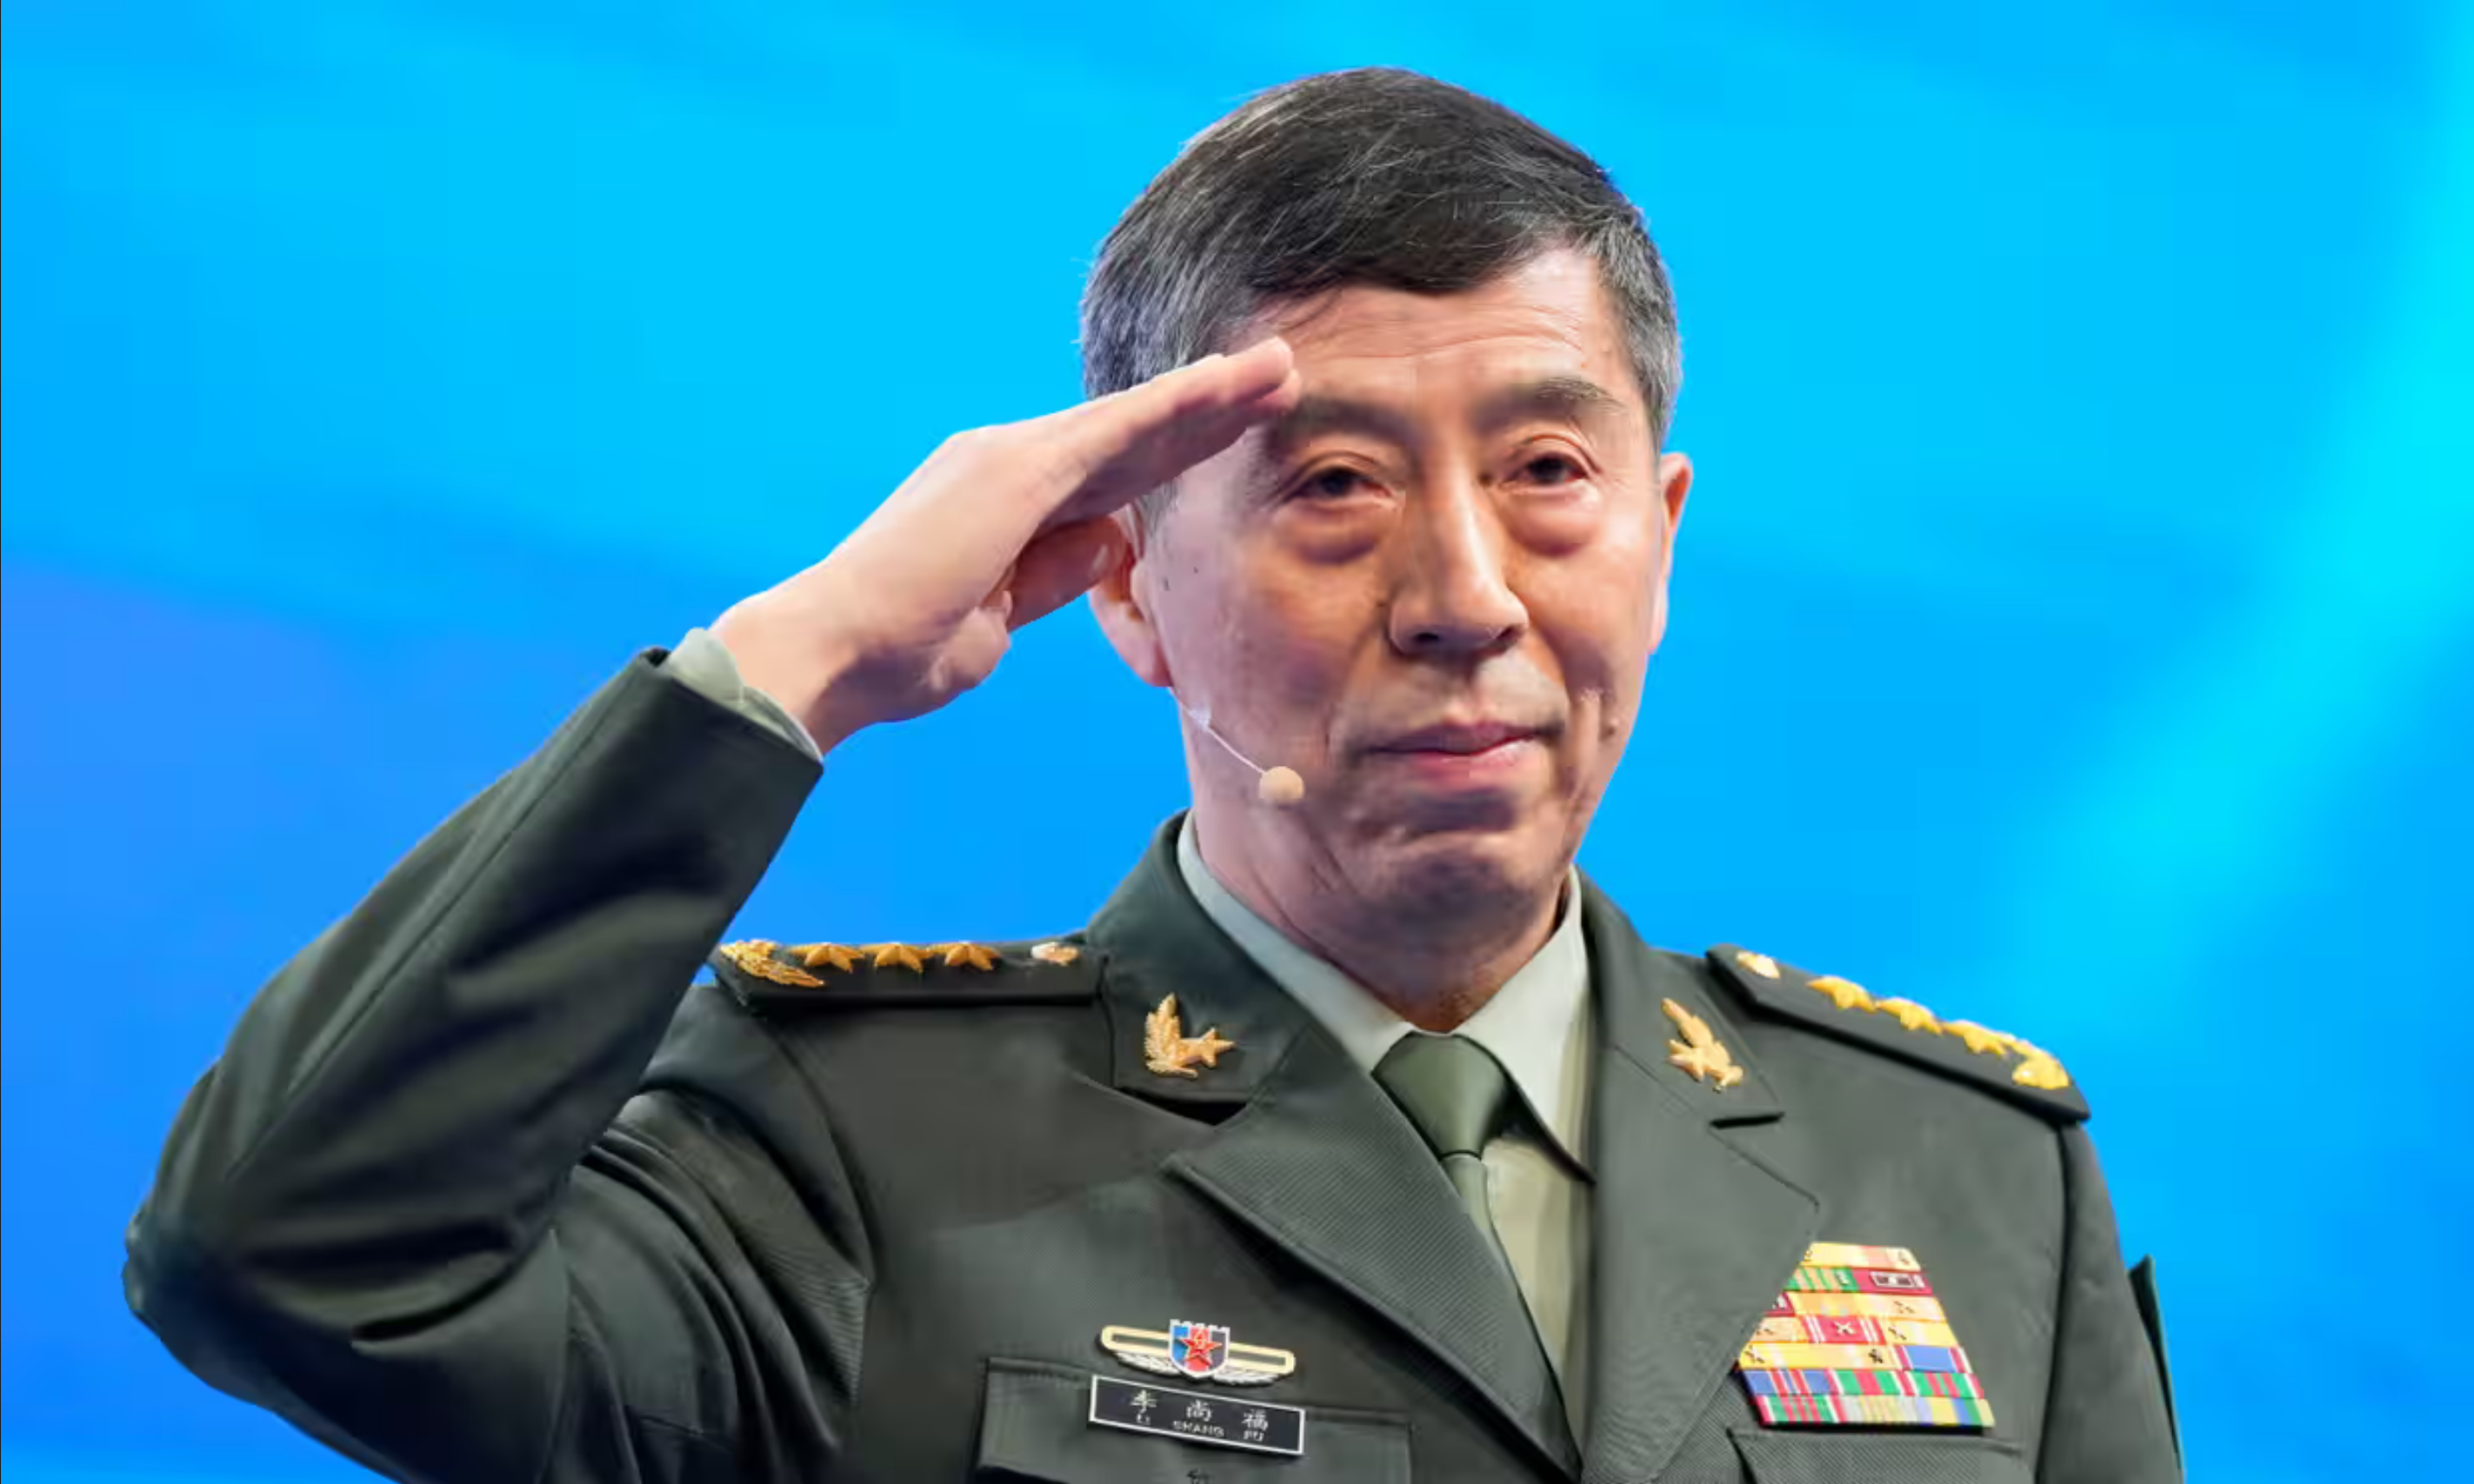 Li Shangfu: speculation grows over fate of China’s missing defence minister